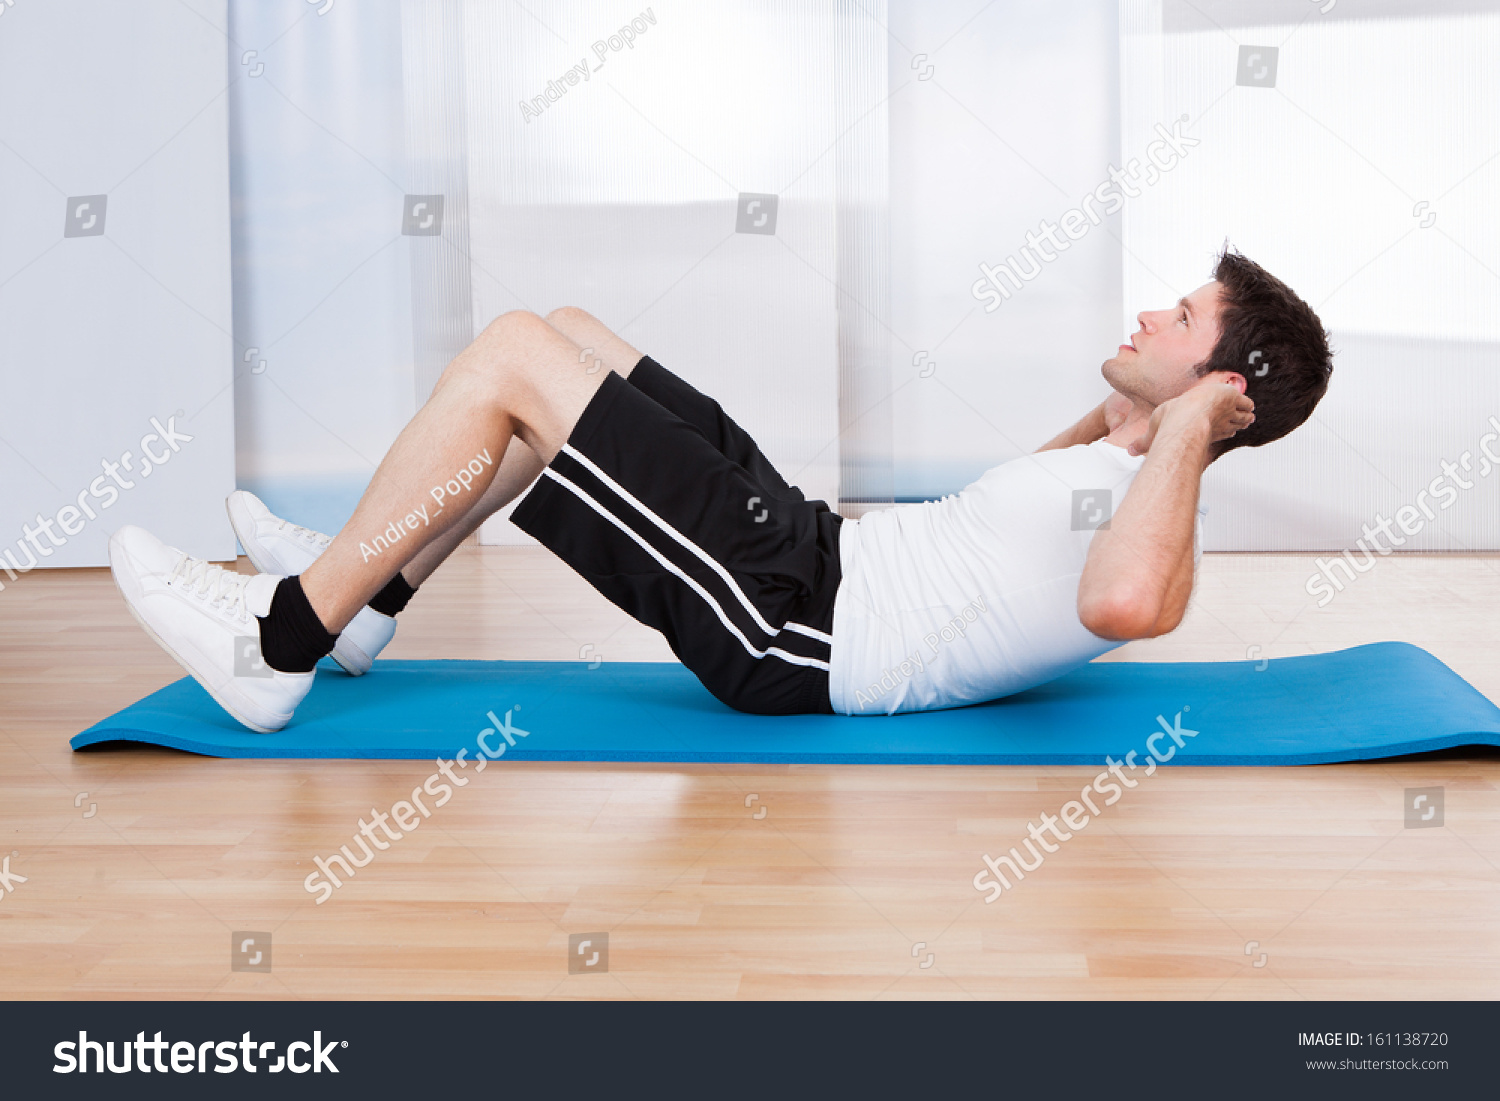 exercise mat for sit ups